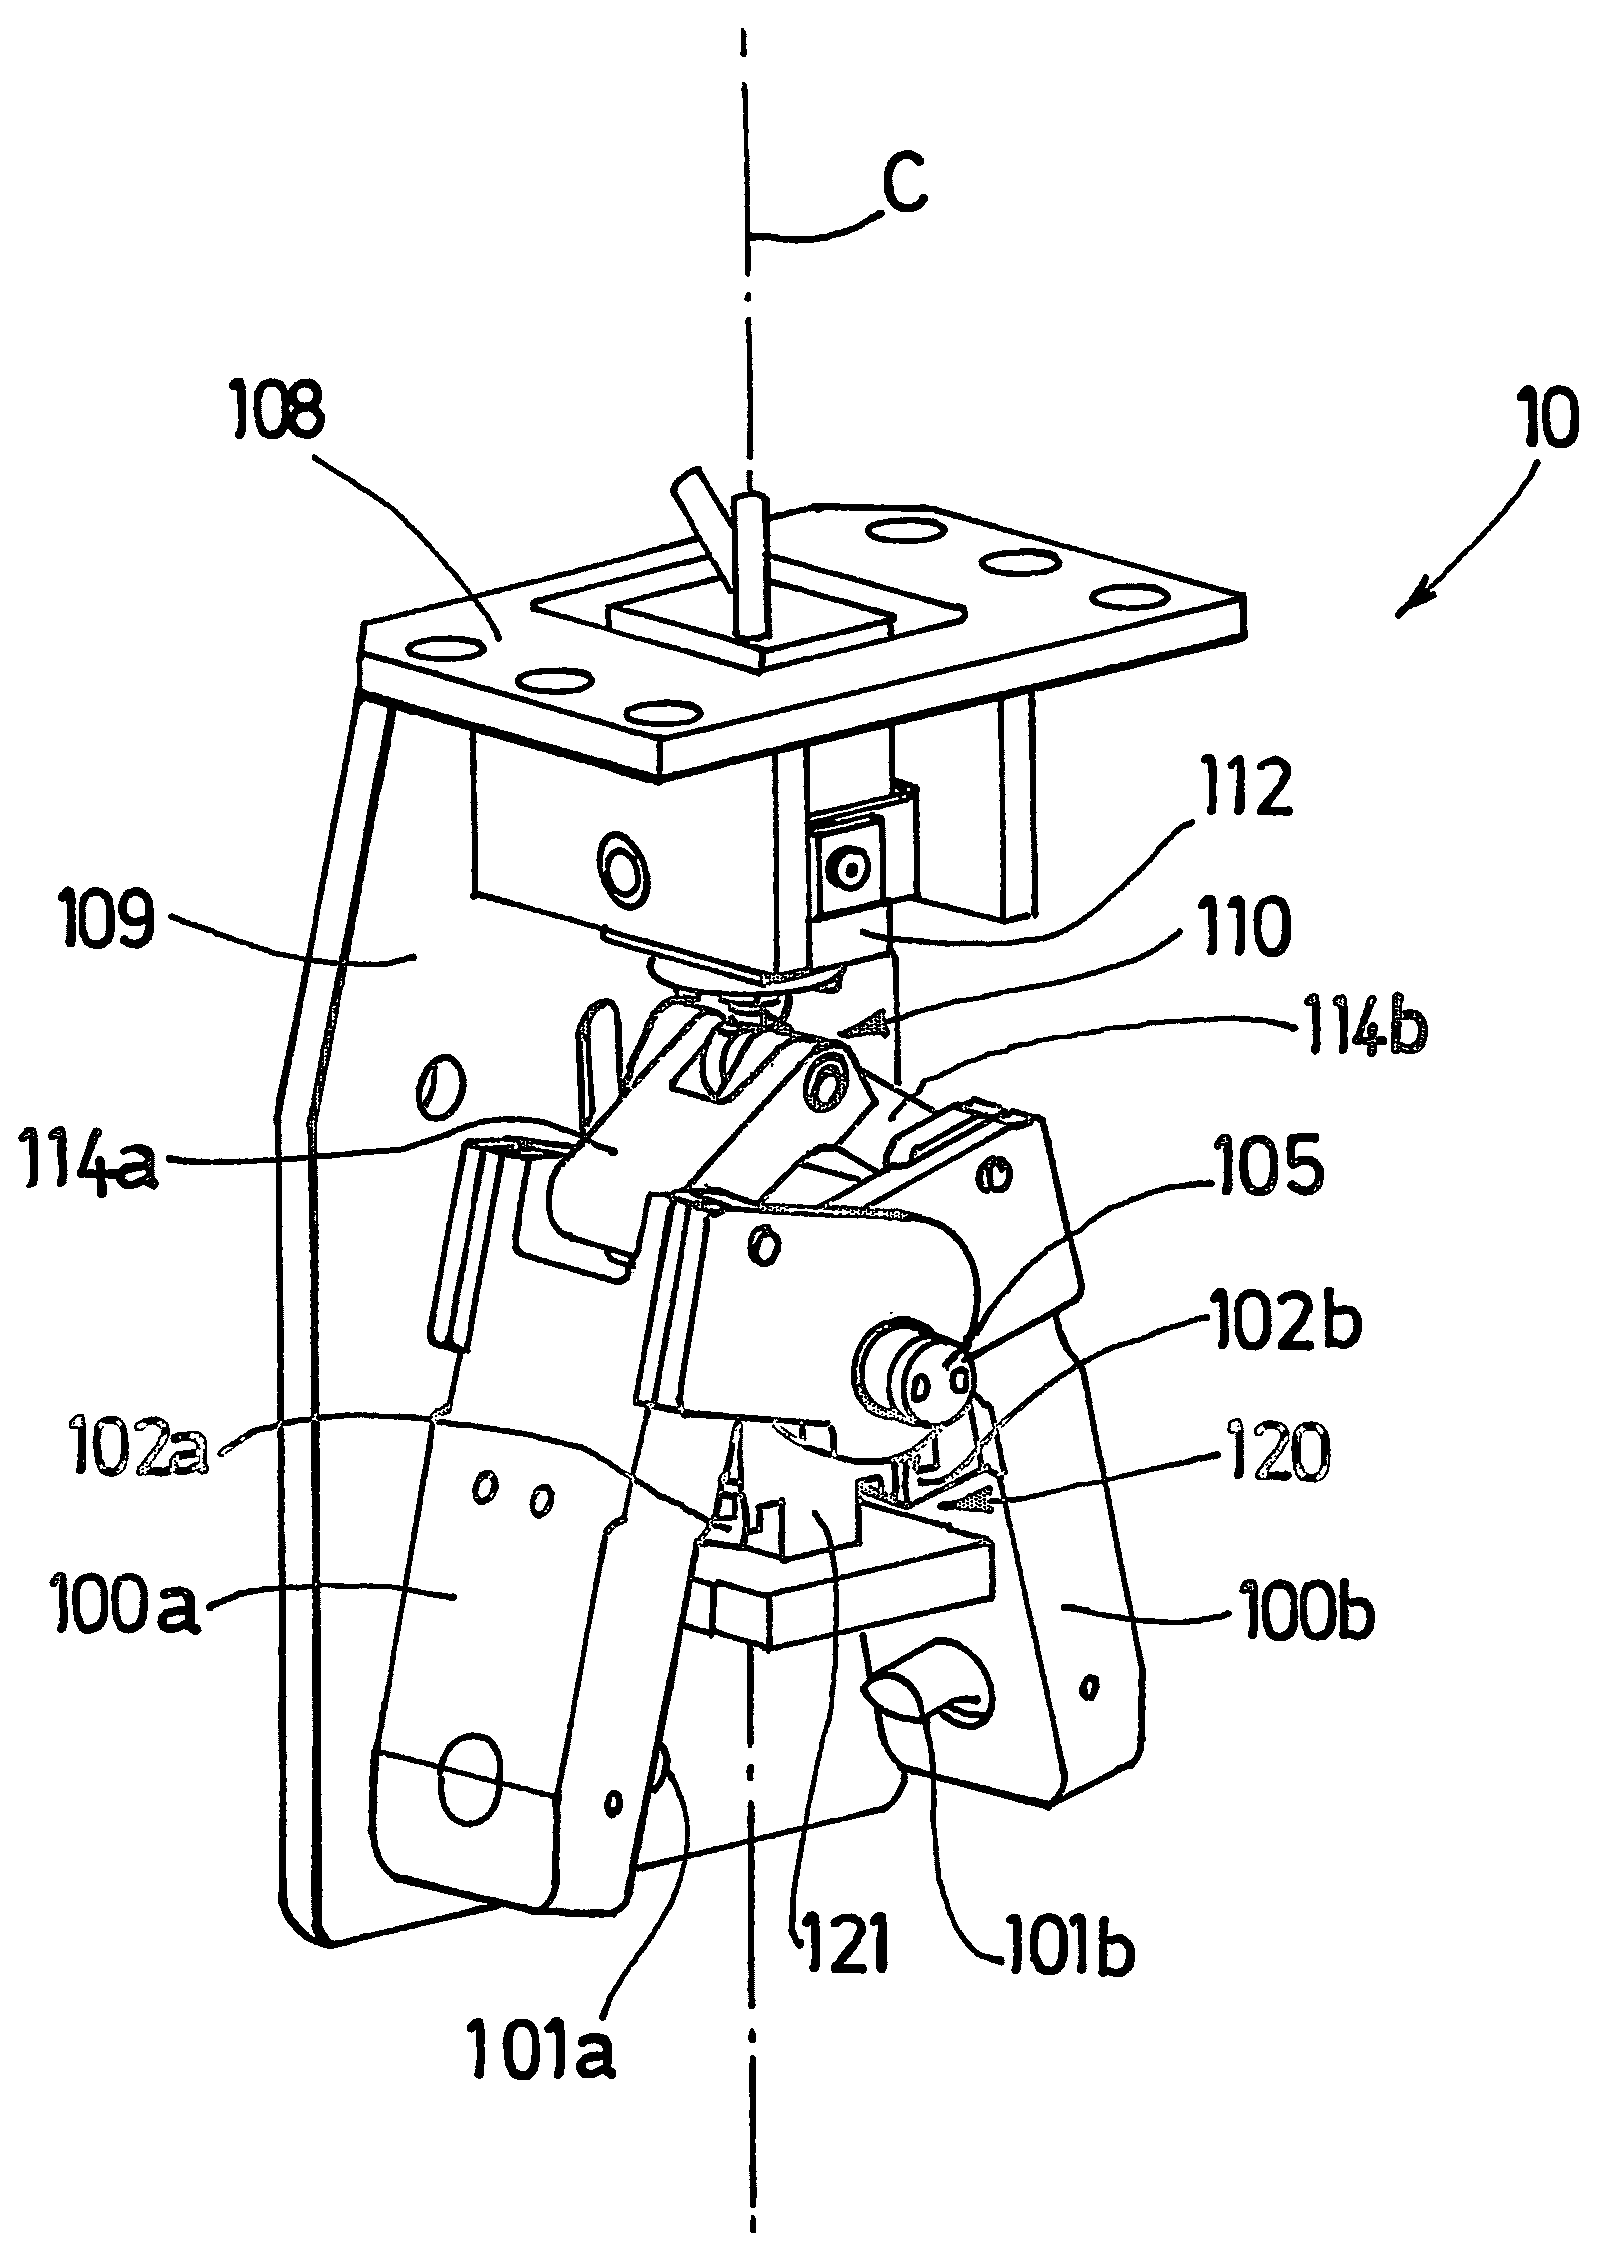 Handling clamp for a machine designed for tending an electrolytic cell used for the production of aluminium